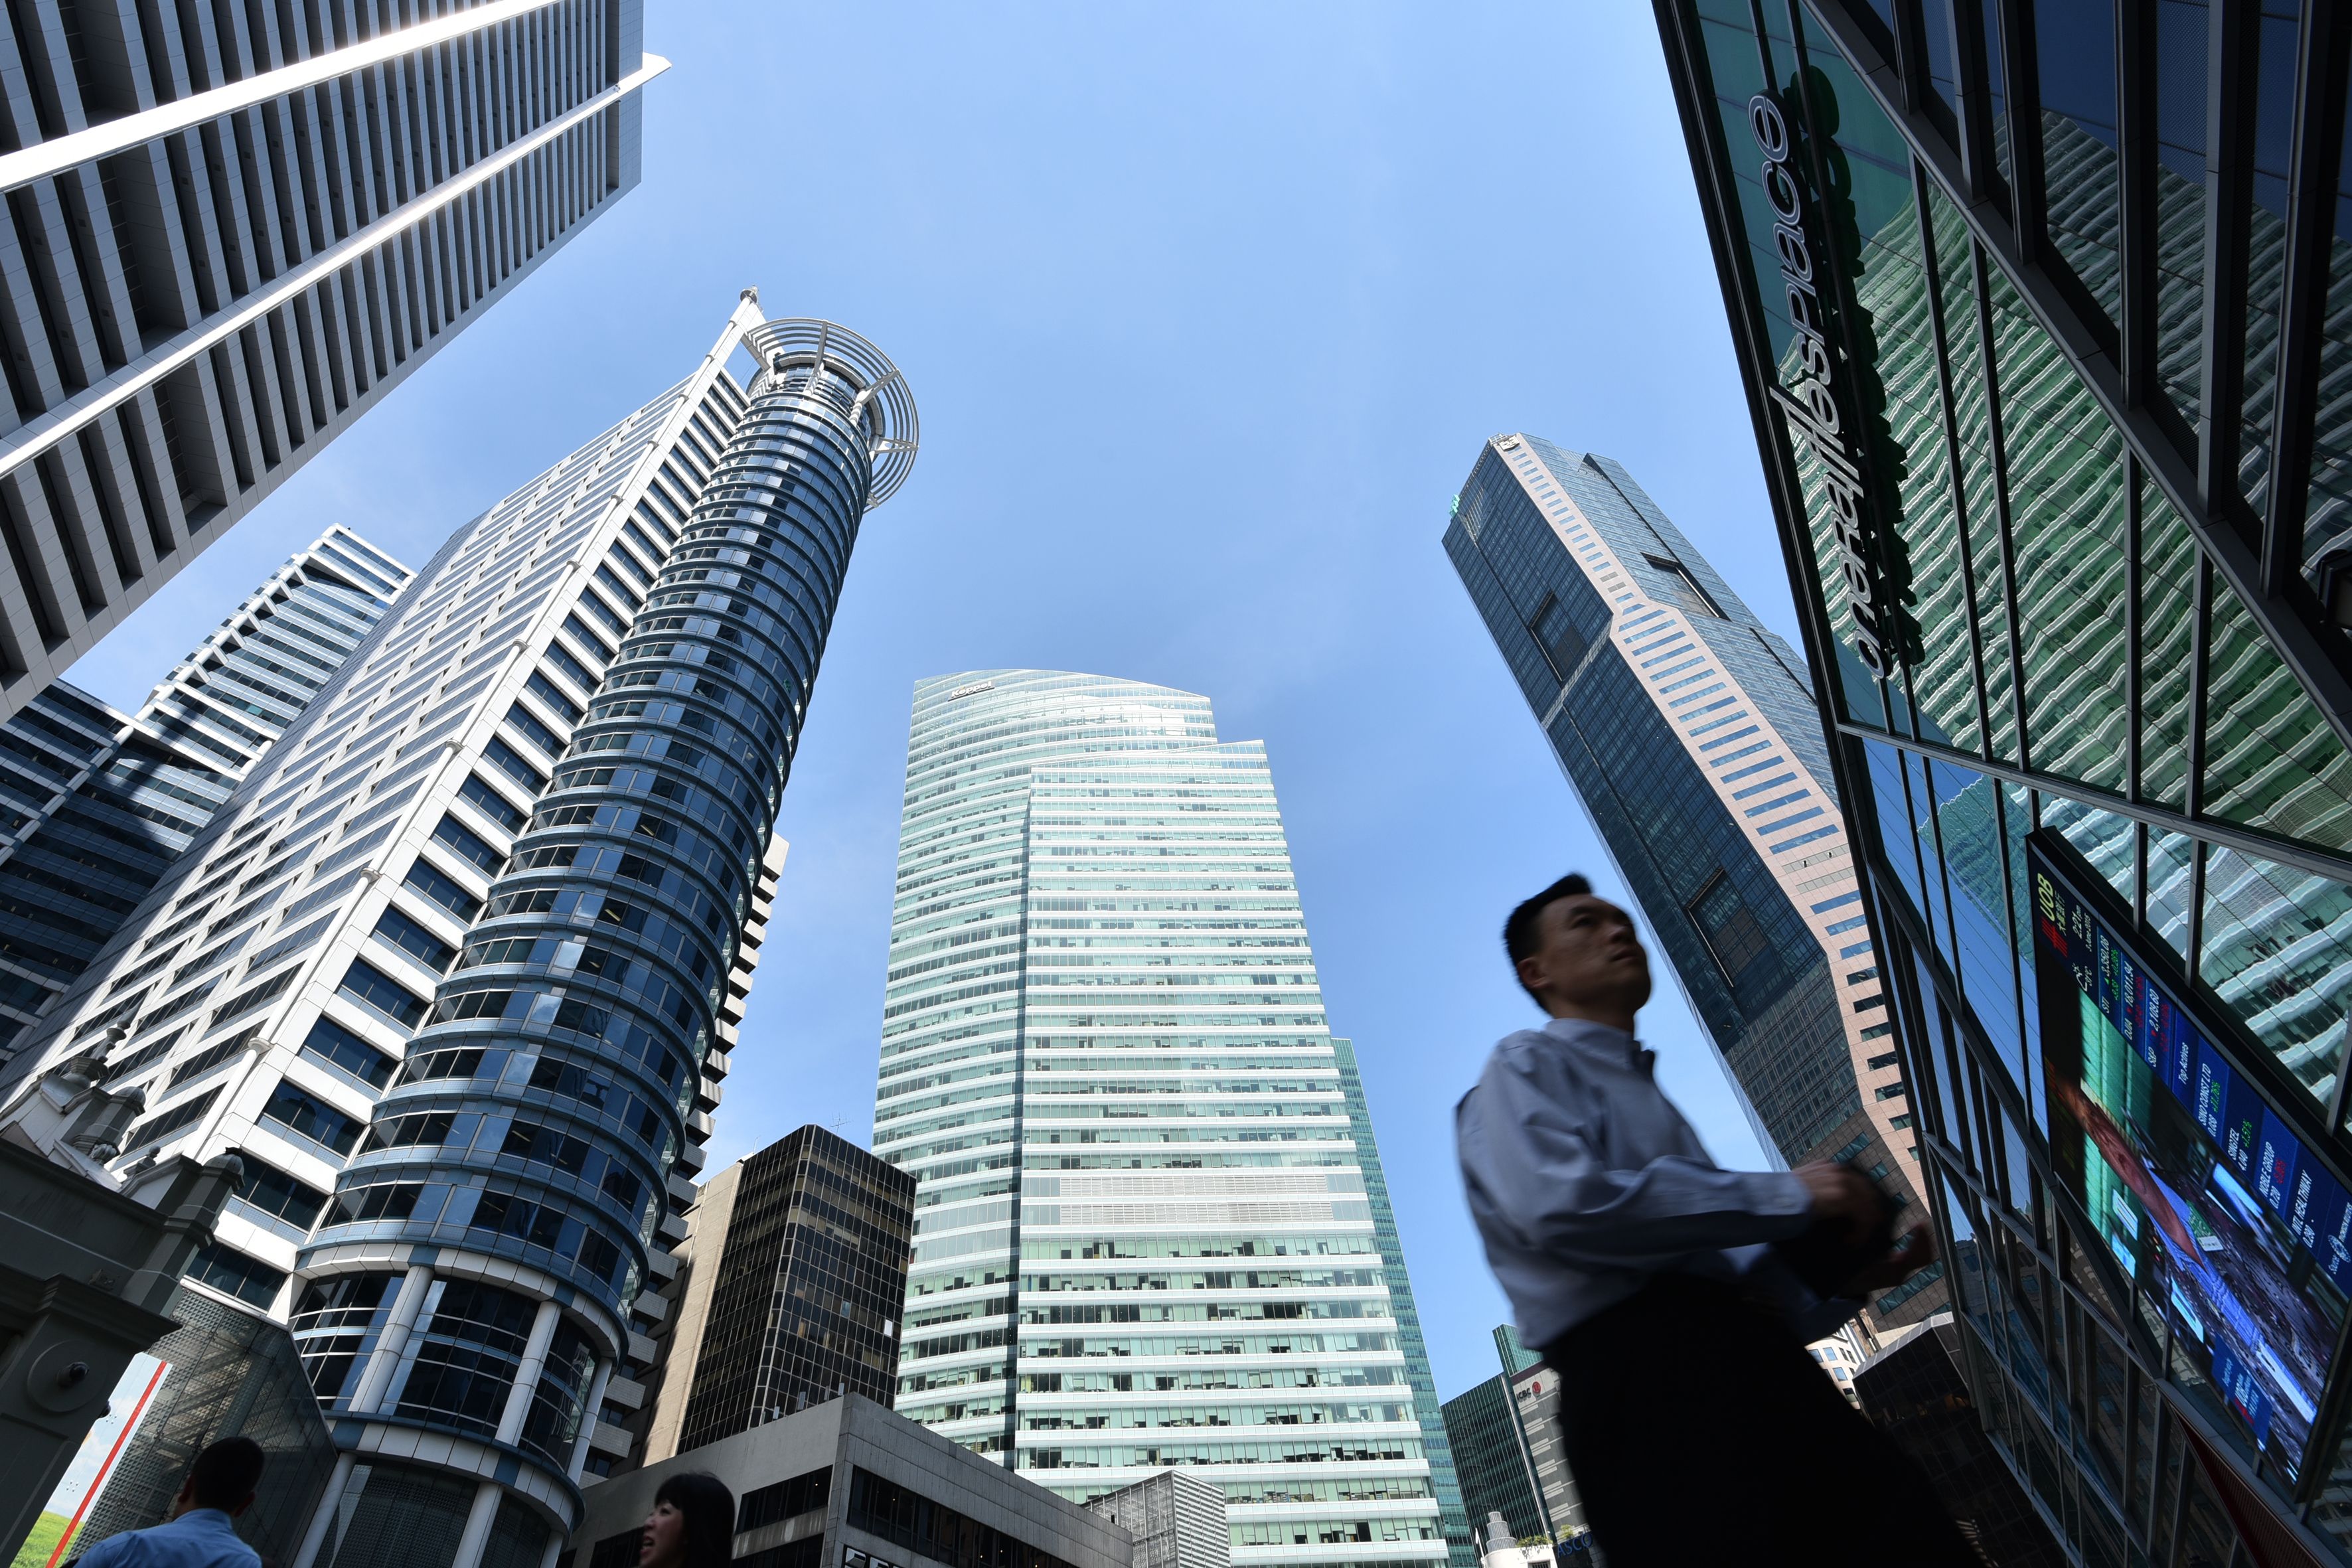 ‘Stars are aligned’ for hospitality and office REITs, which will ‘continue to shine’: DBS